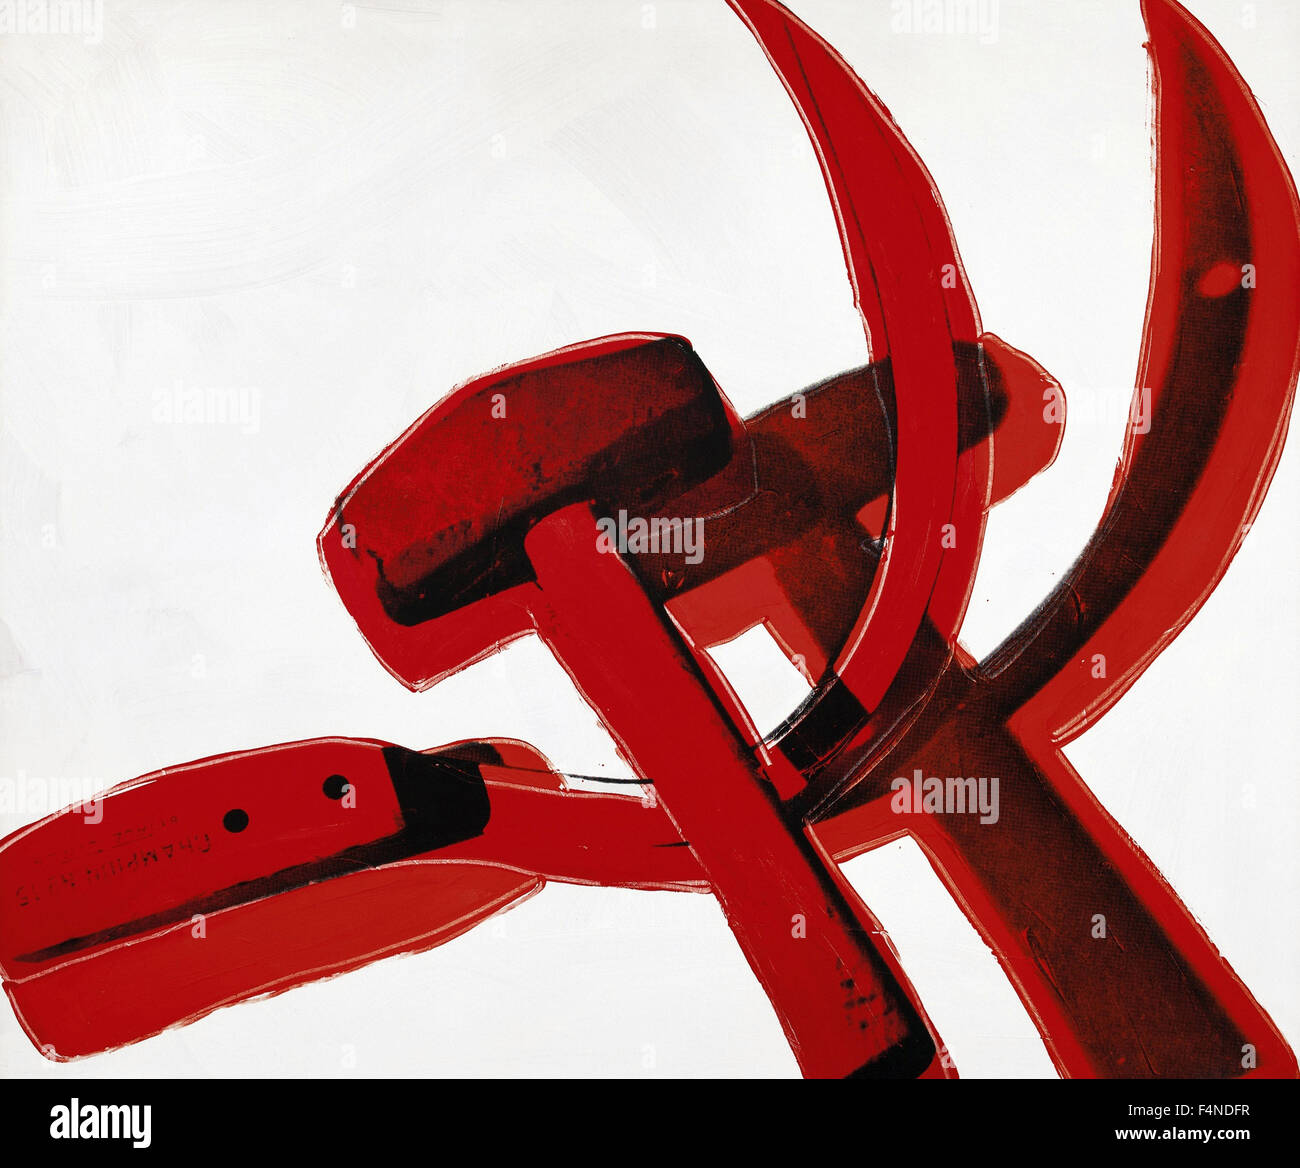 Andy Warhol - Hammer and Sickle Stock Photo